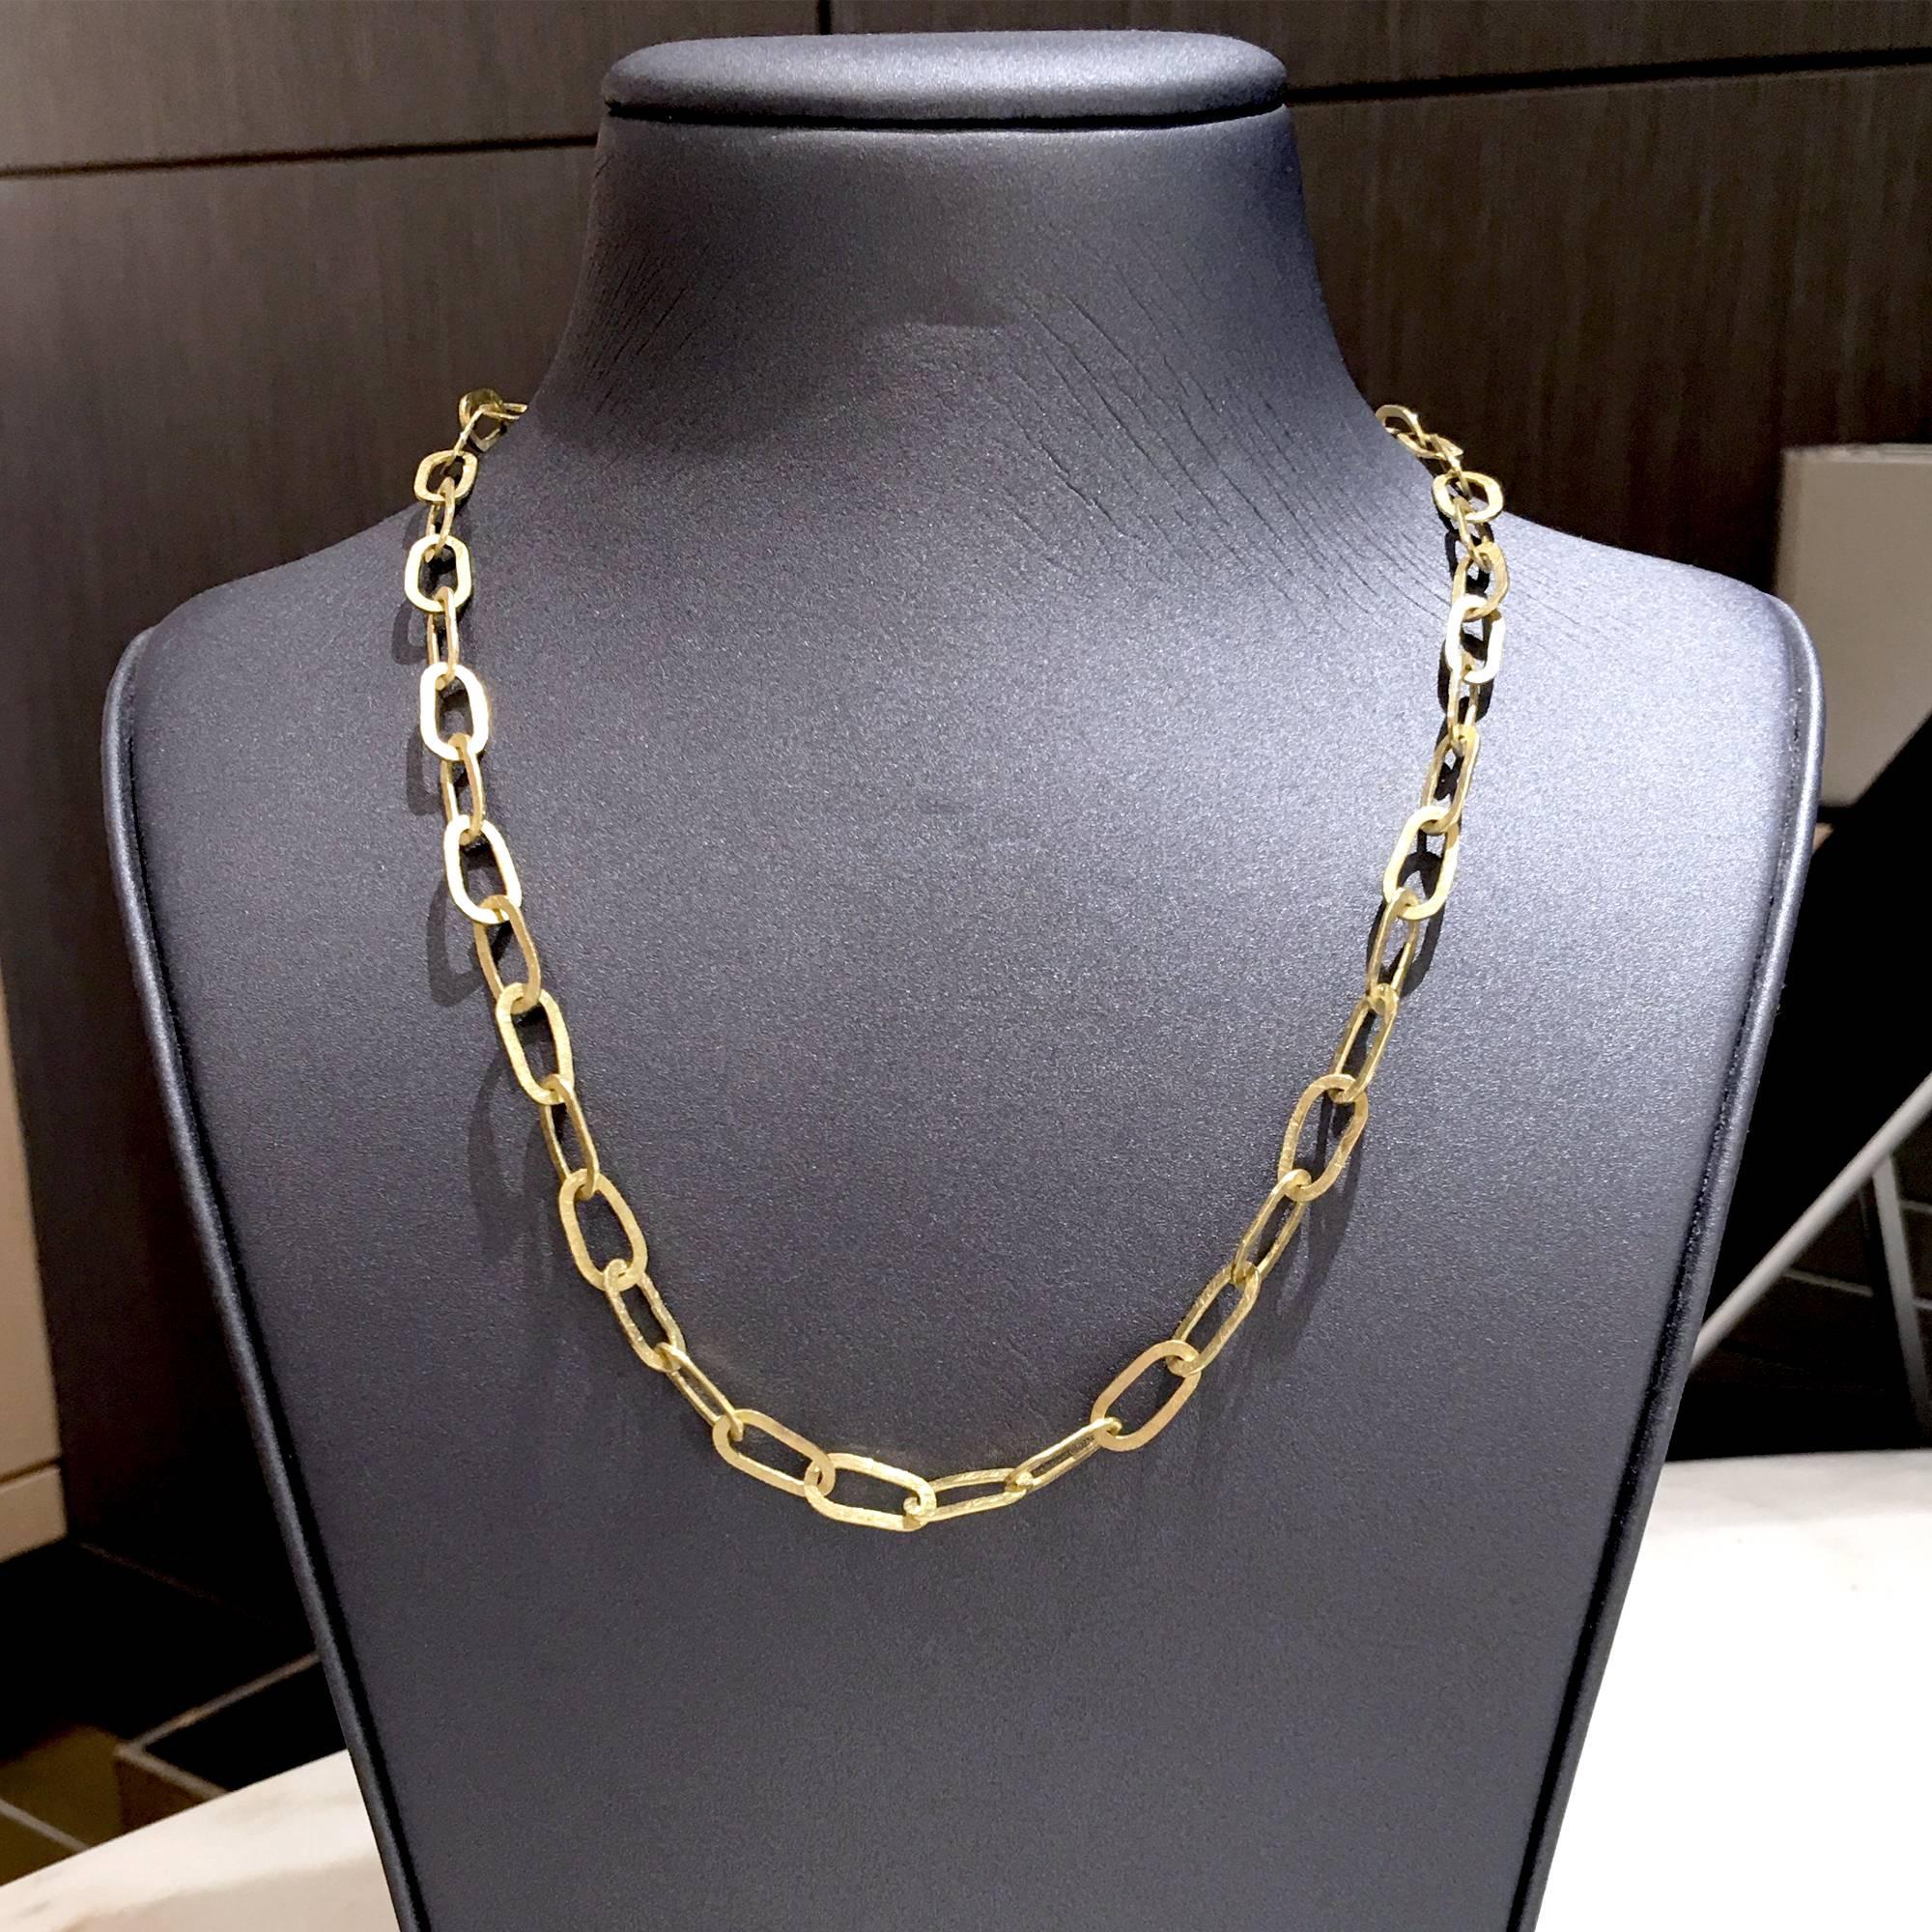 Heavy Oval Links Chain Necklace handmade by jewelry artist Petra Class in matte-finished 18k yellow gold. Wearable at 18.5" or any shorter length desired. Additional layering chain designs available.

Stamped and Hallmarked 18k / PC